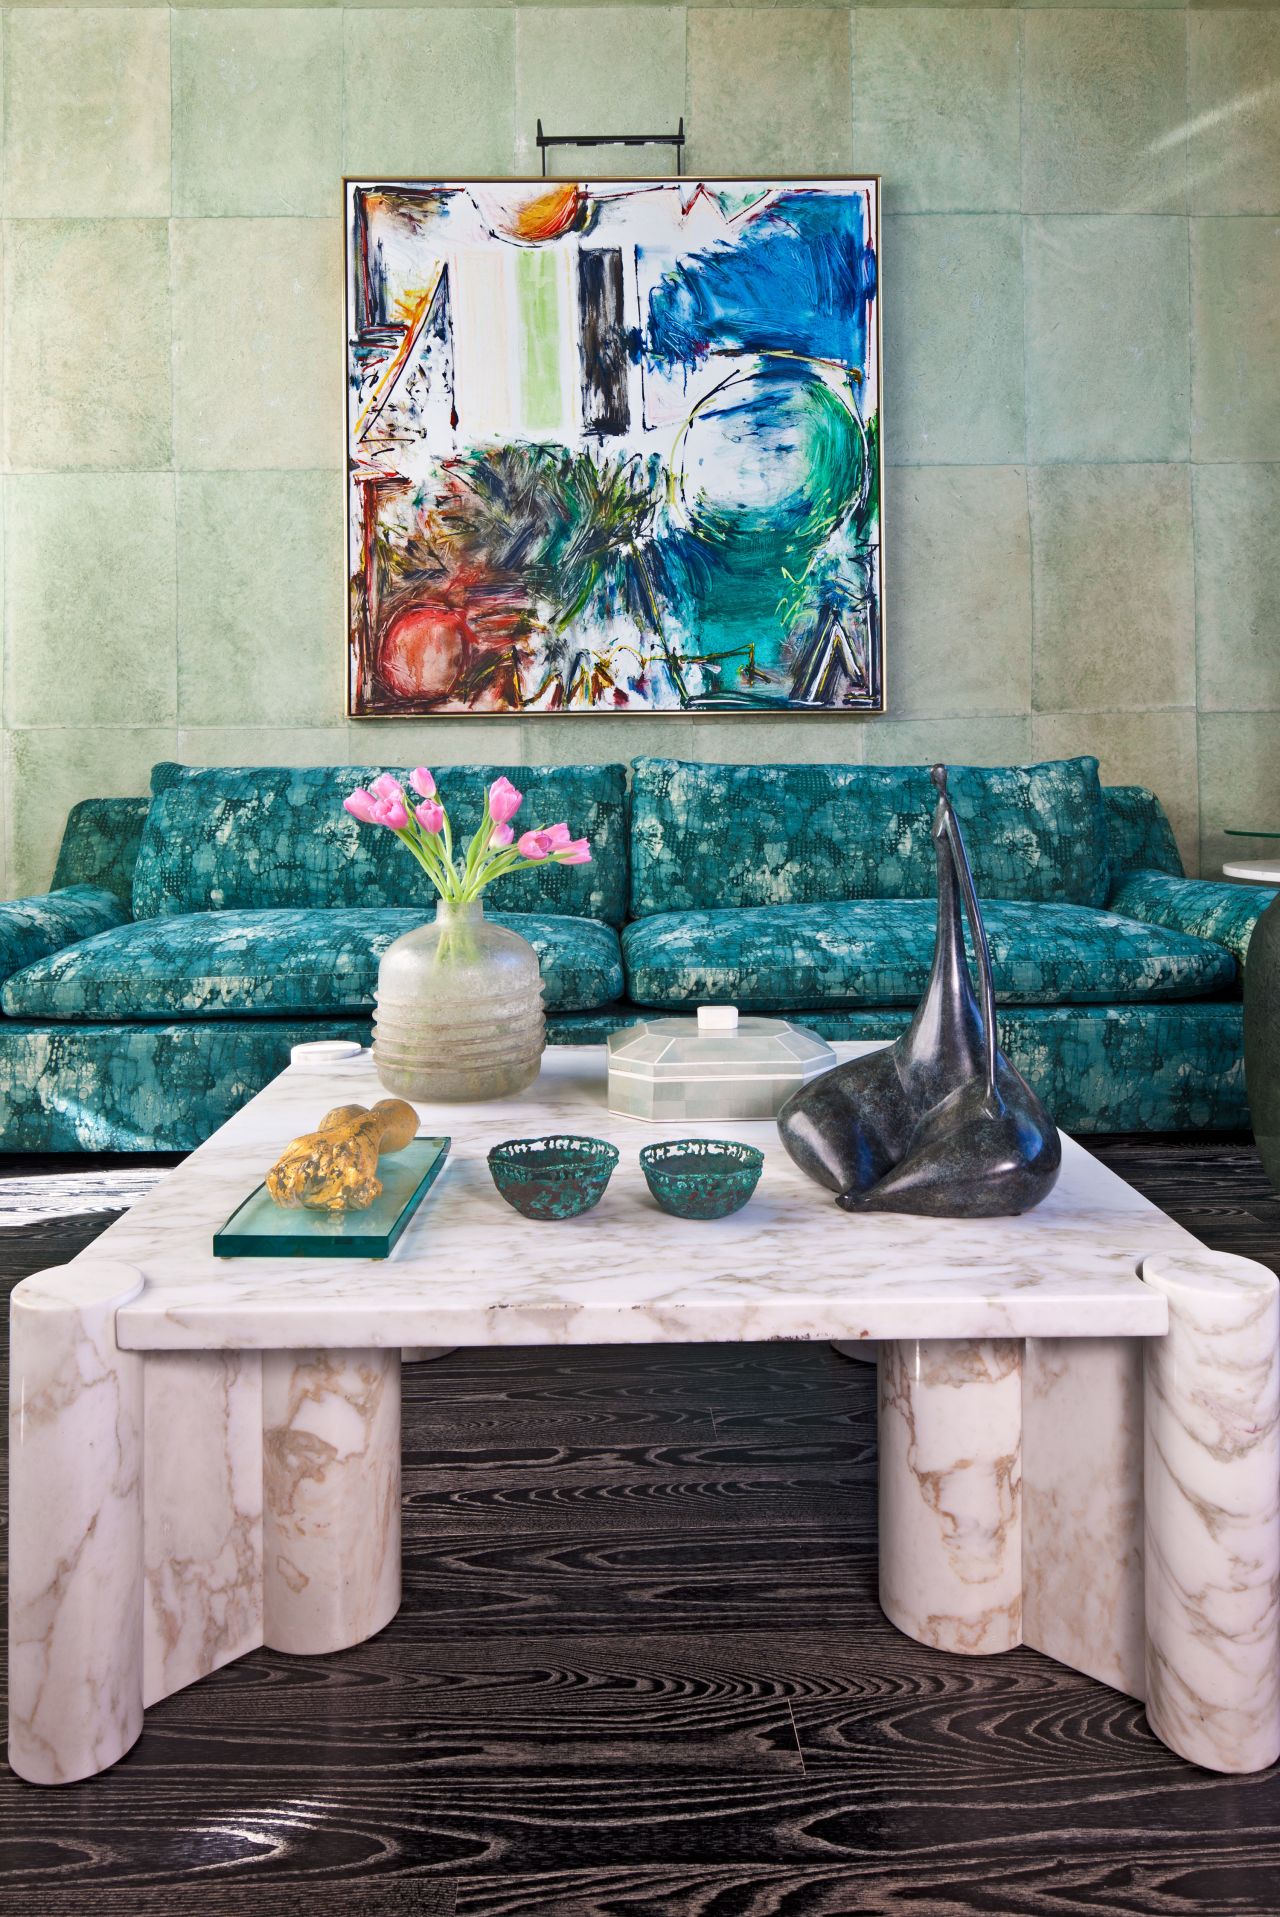 This room in a triplex apartment in New York City has an intimate seating area with a monochromatic palette in hues of teal and mineral fabric by Kelly Wearstler. The walls are covered in vegetable-dyed handmade paper by Cannon Bullock.